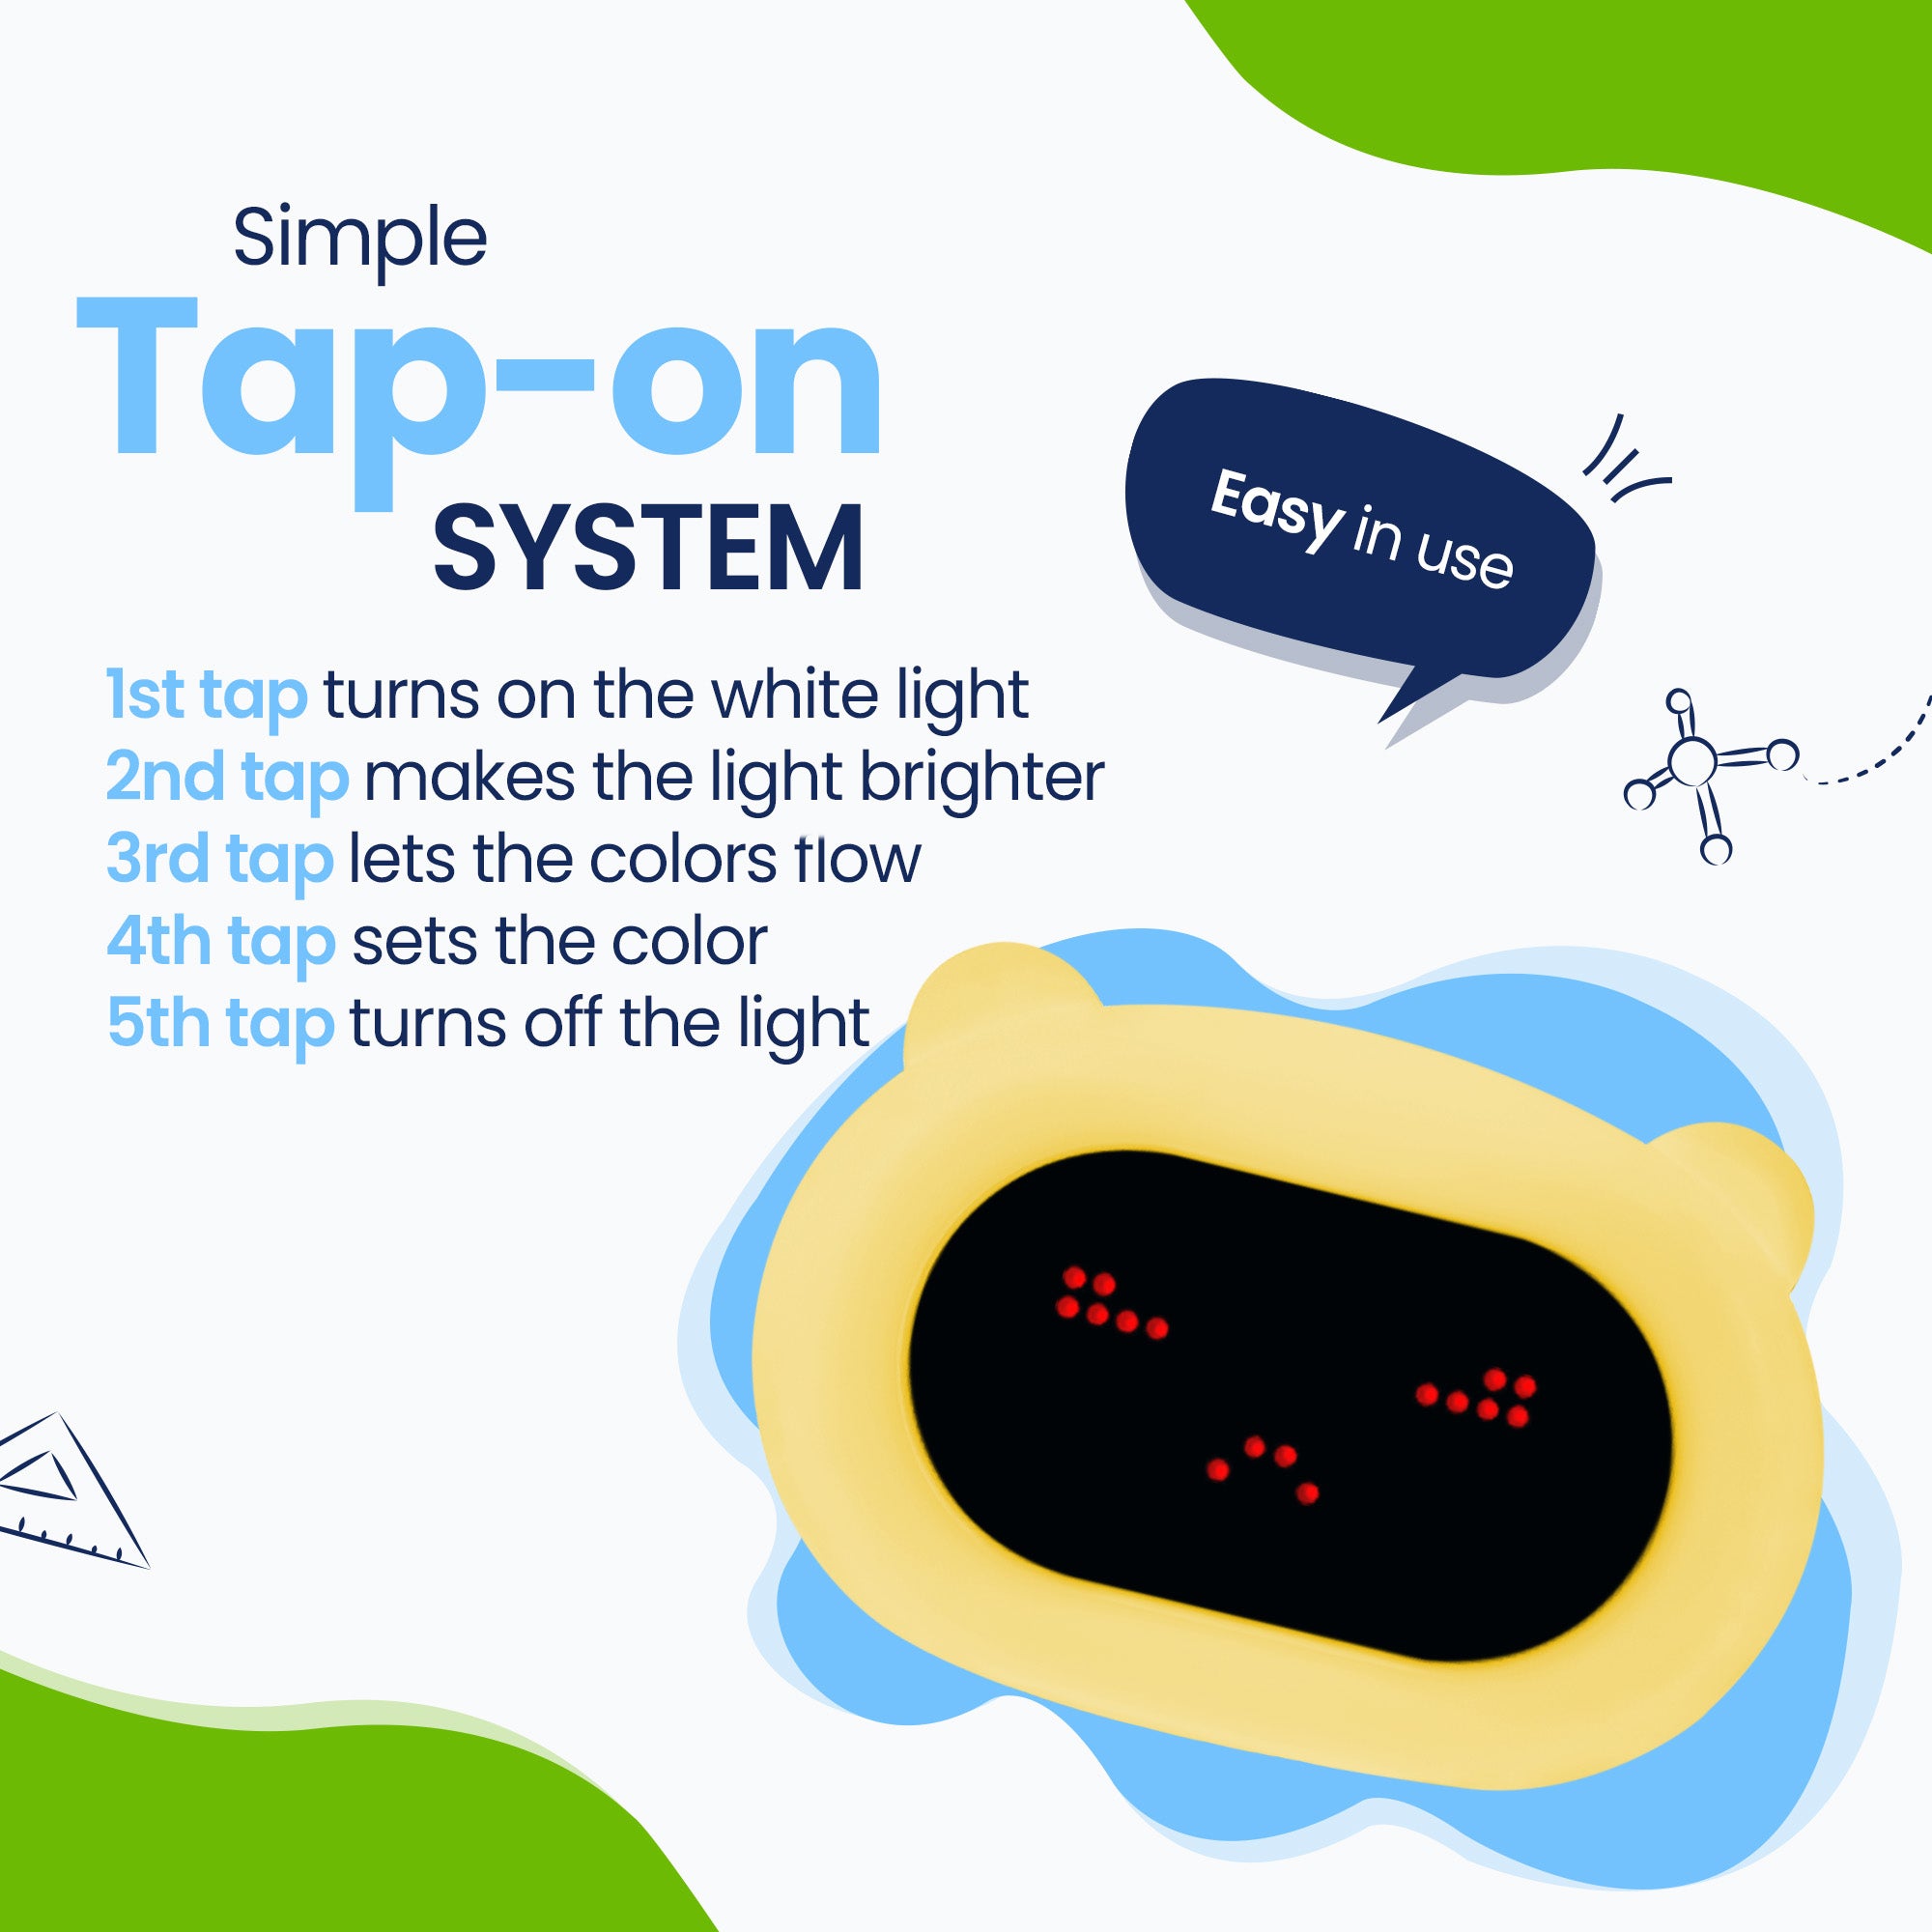 A simple Tap-on system. Easy in use